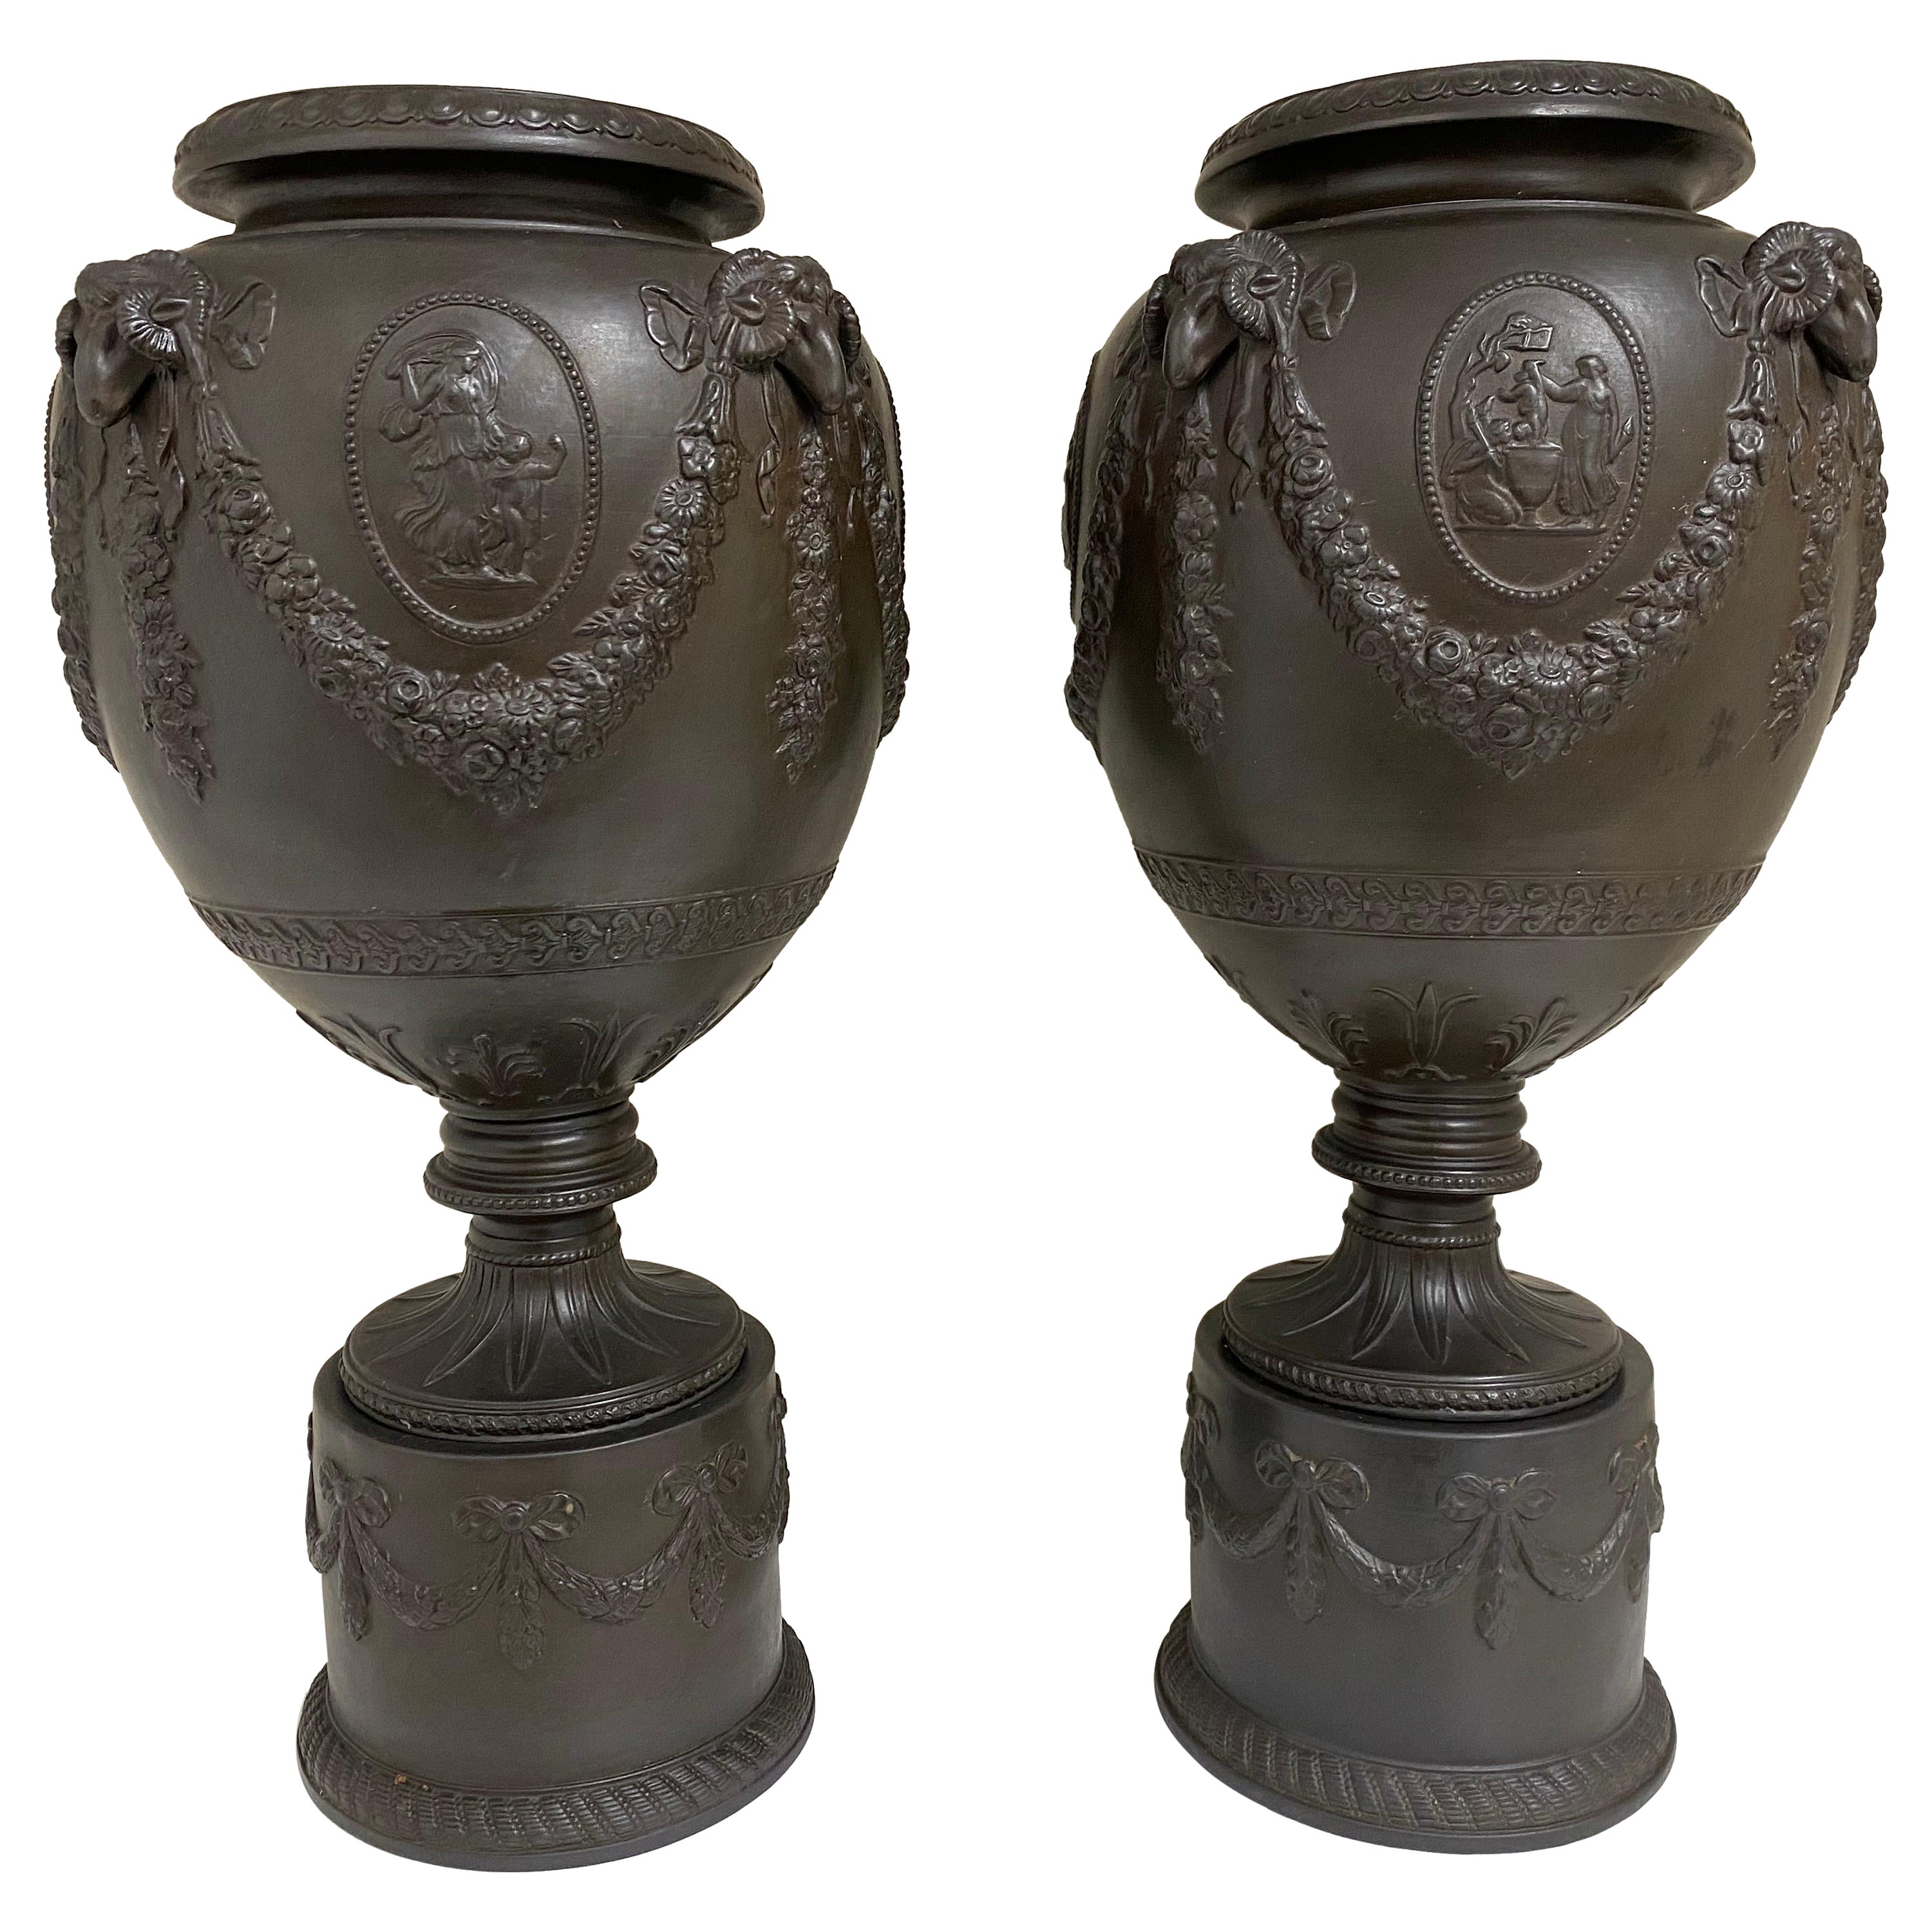 Pair of Ceramic Basalt Relief Urns Attributed to Wedgwood For Sale